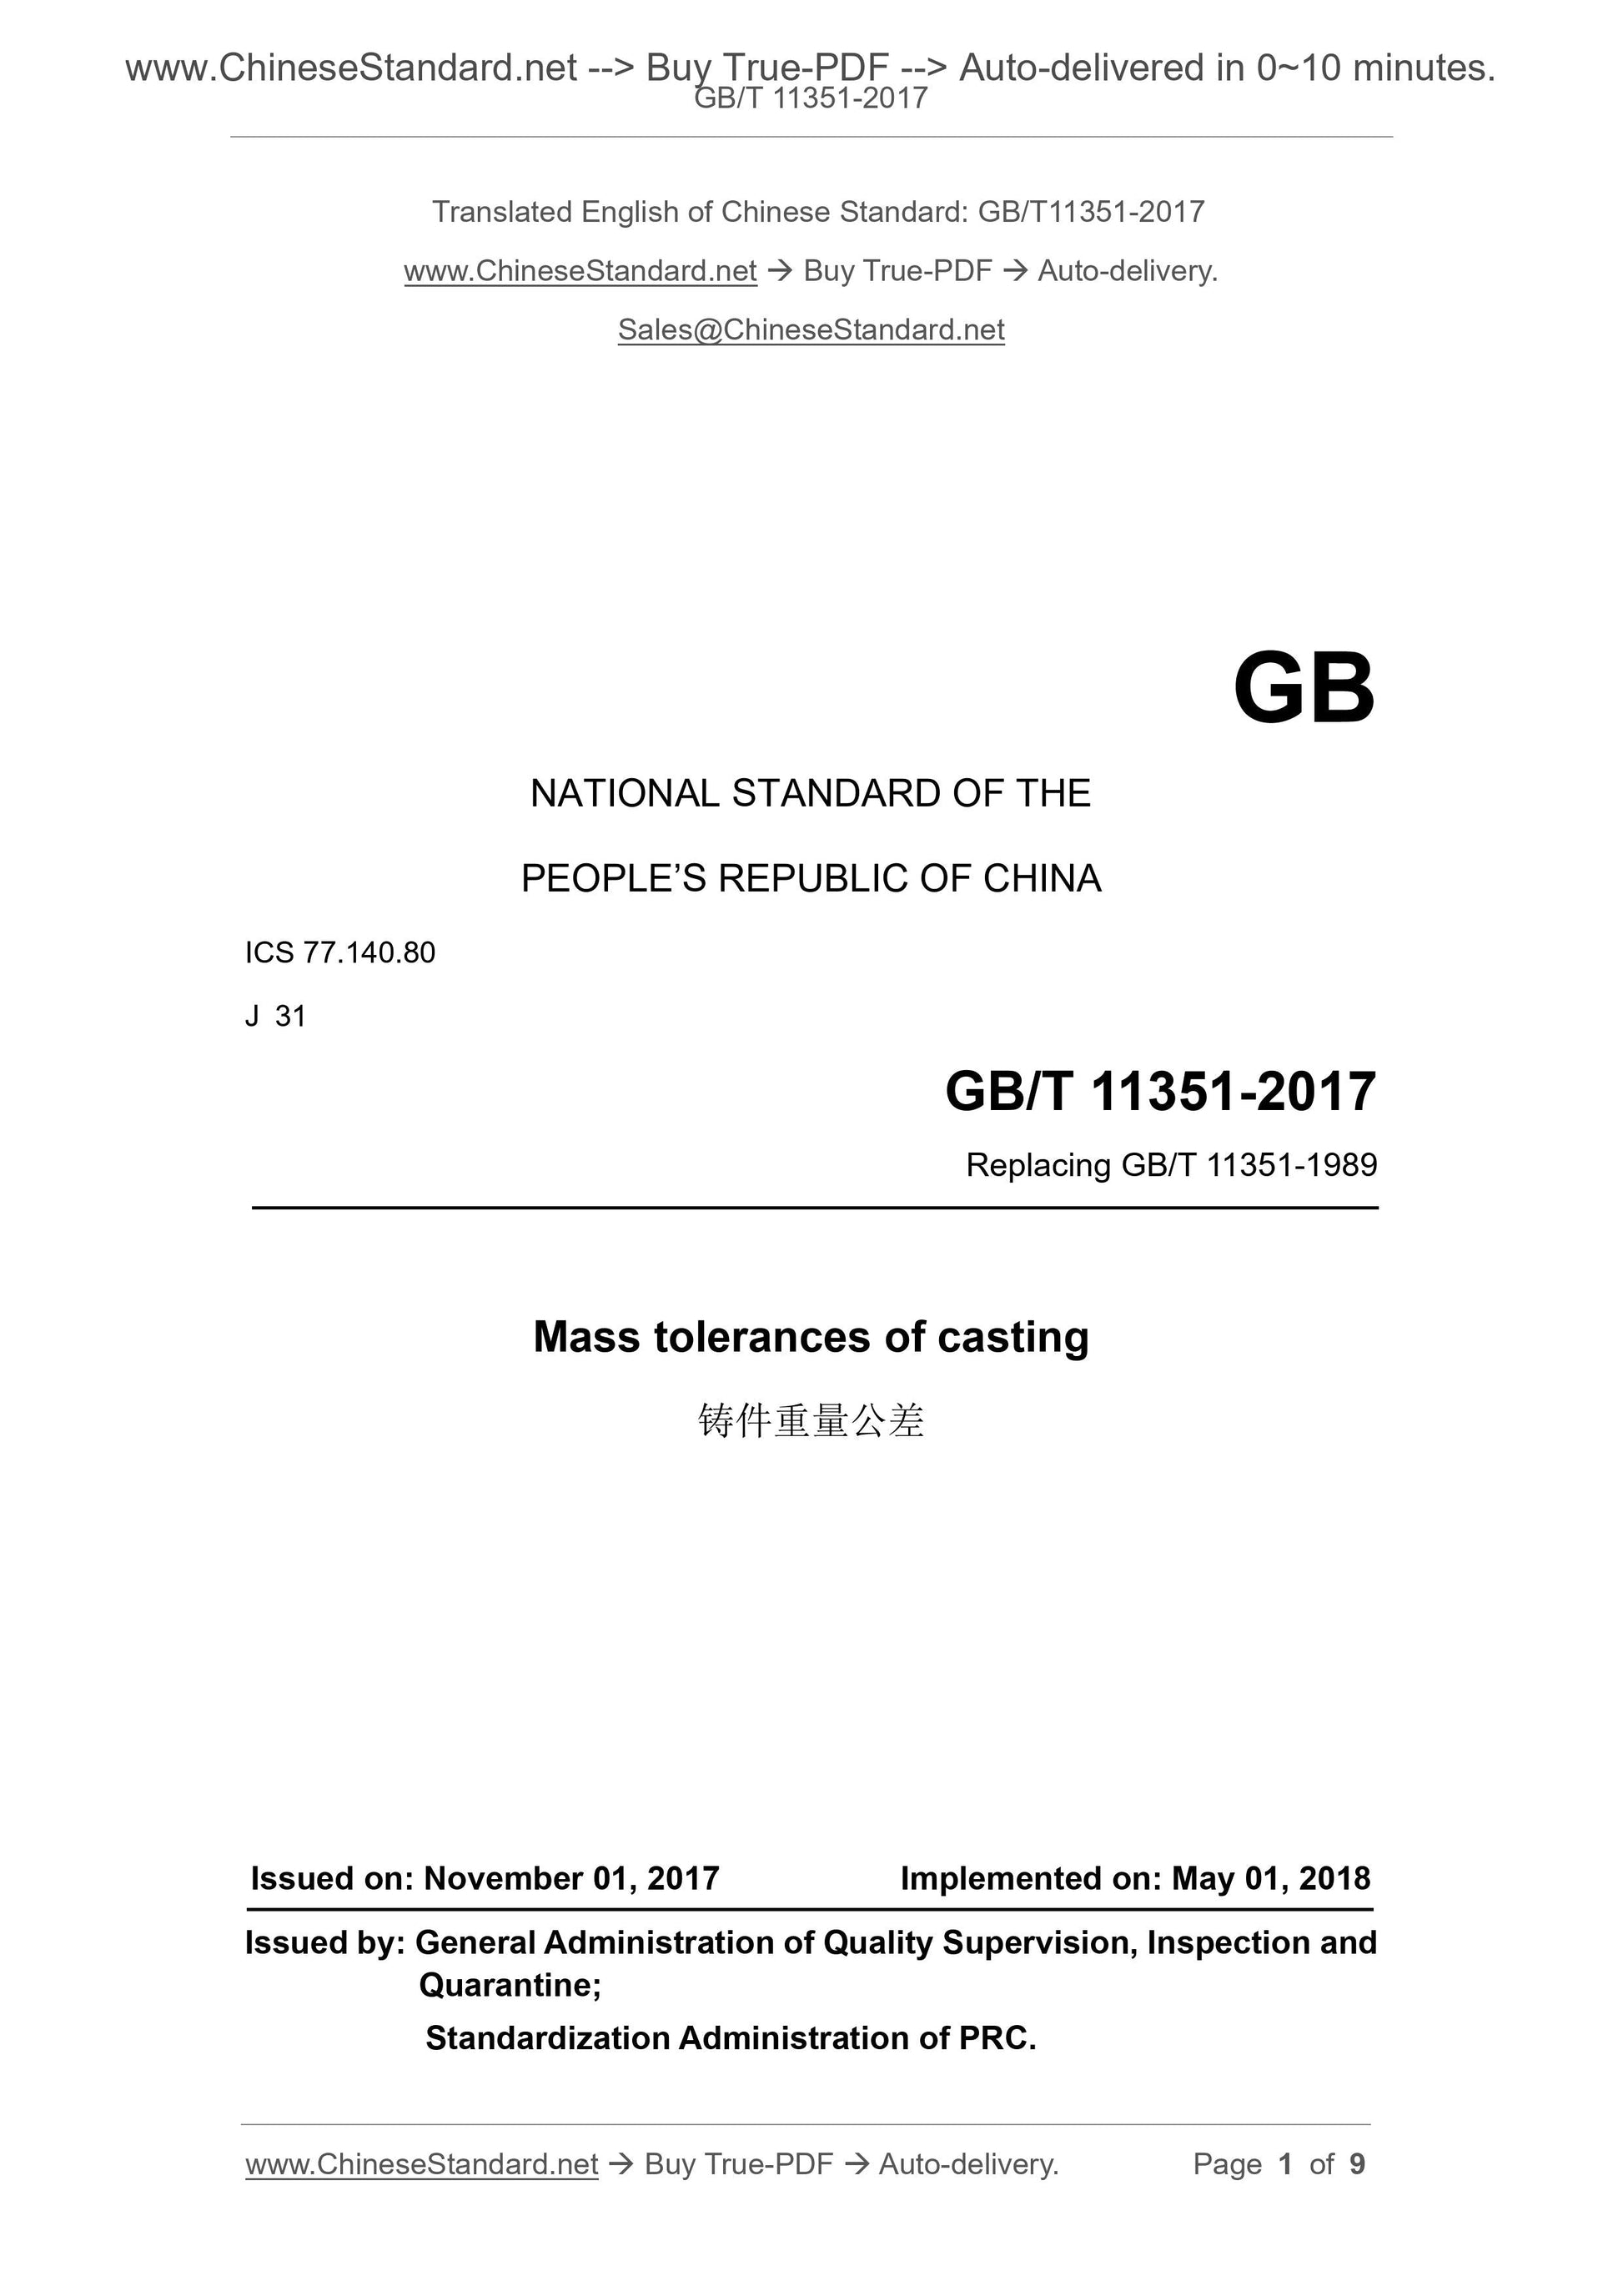 GB/T 11351-2017 Page 1